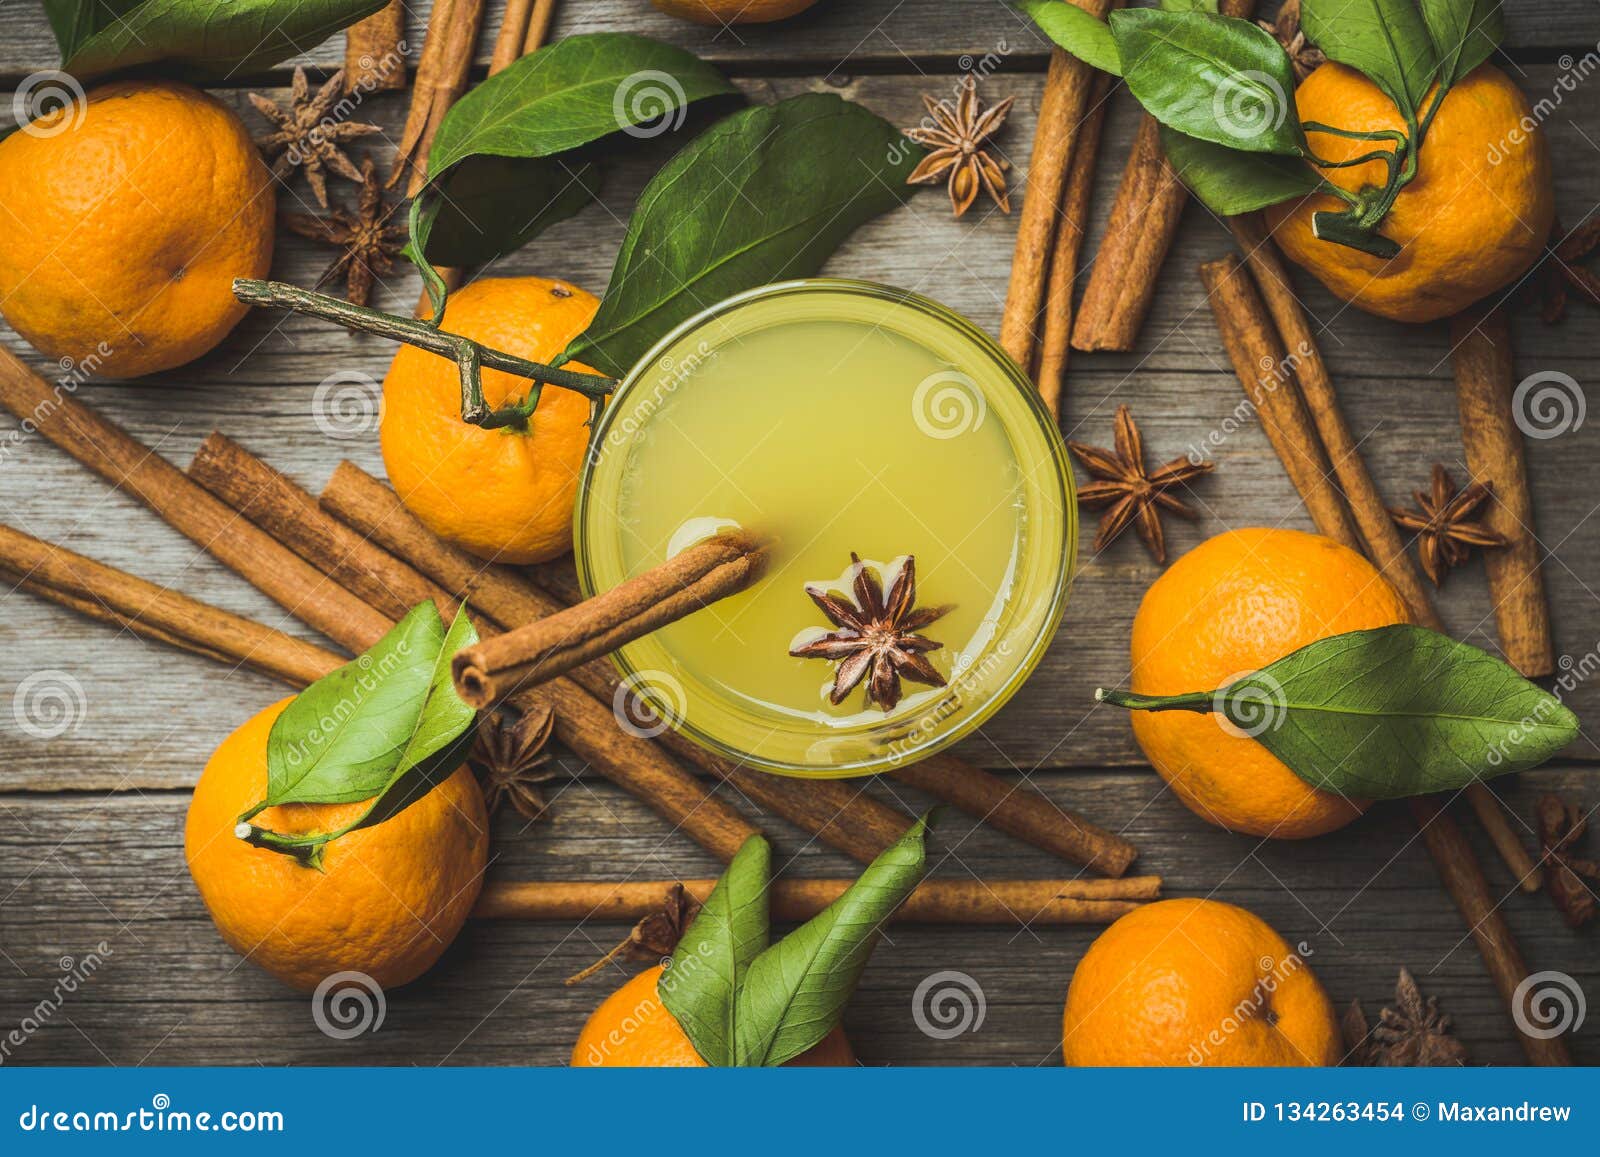 Old Fashioned Citrus Beverage with Spices Stock Photo - Image of flat ...